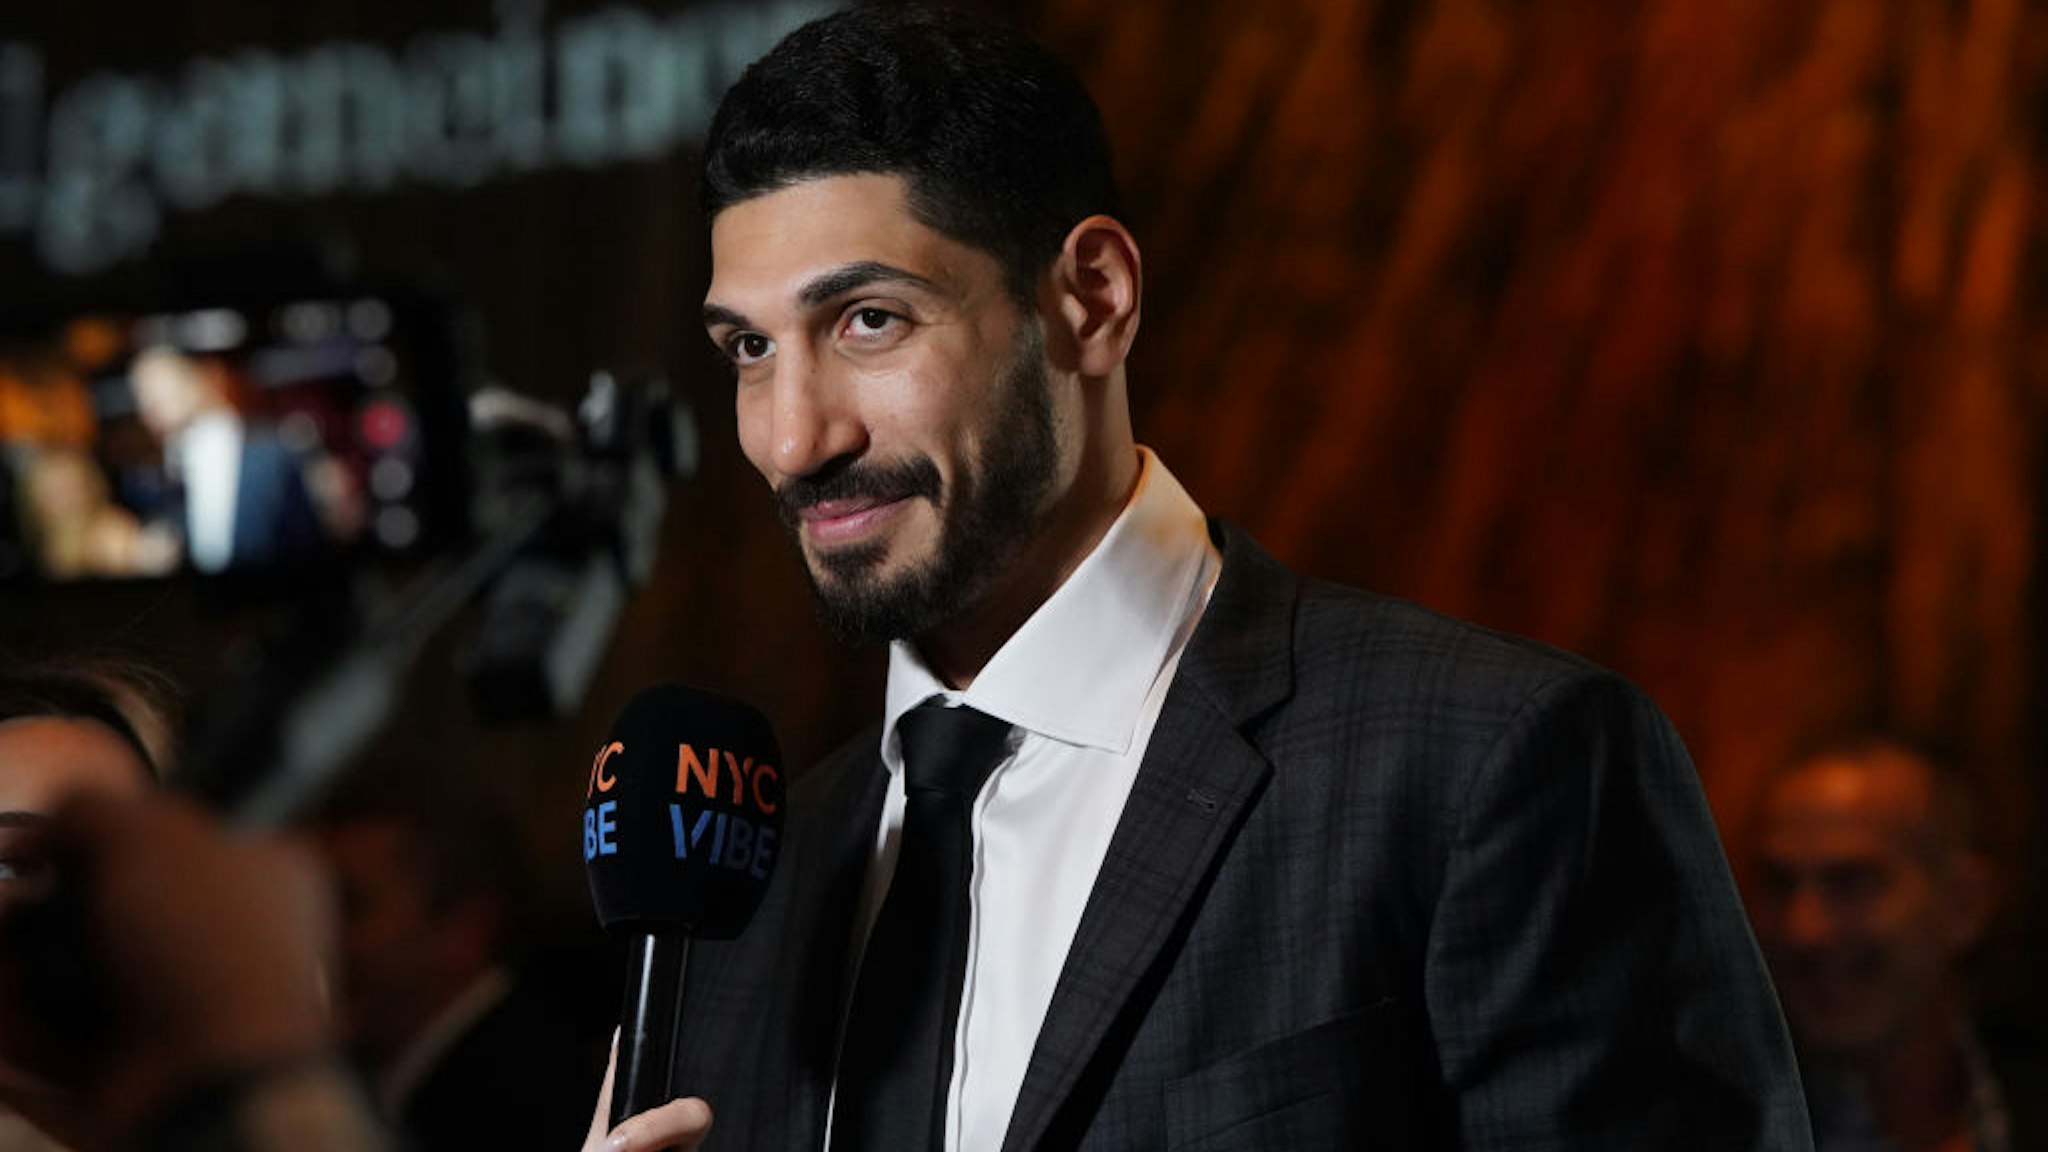 NEW YORK, NEW YORK - NOVEMBER 29: Enes Kanter Freedom attend the Algemeiner 50th Anniversary J100 Gala at The Ziegfeld Ballroom on November 29, 2022 in New York City. (Photo by Jared Siskin/Patrick McMullan via Getty Images)